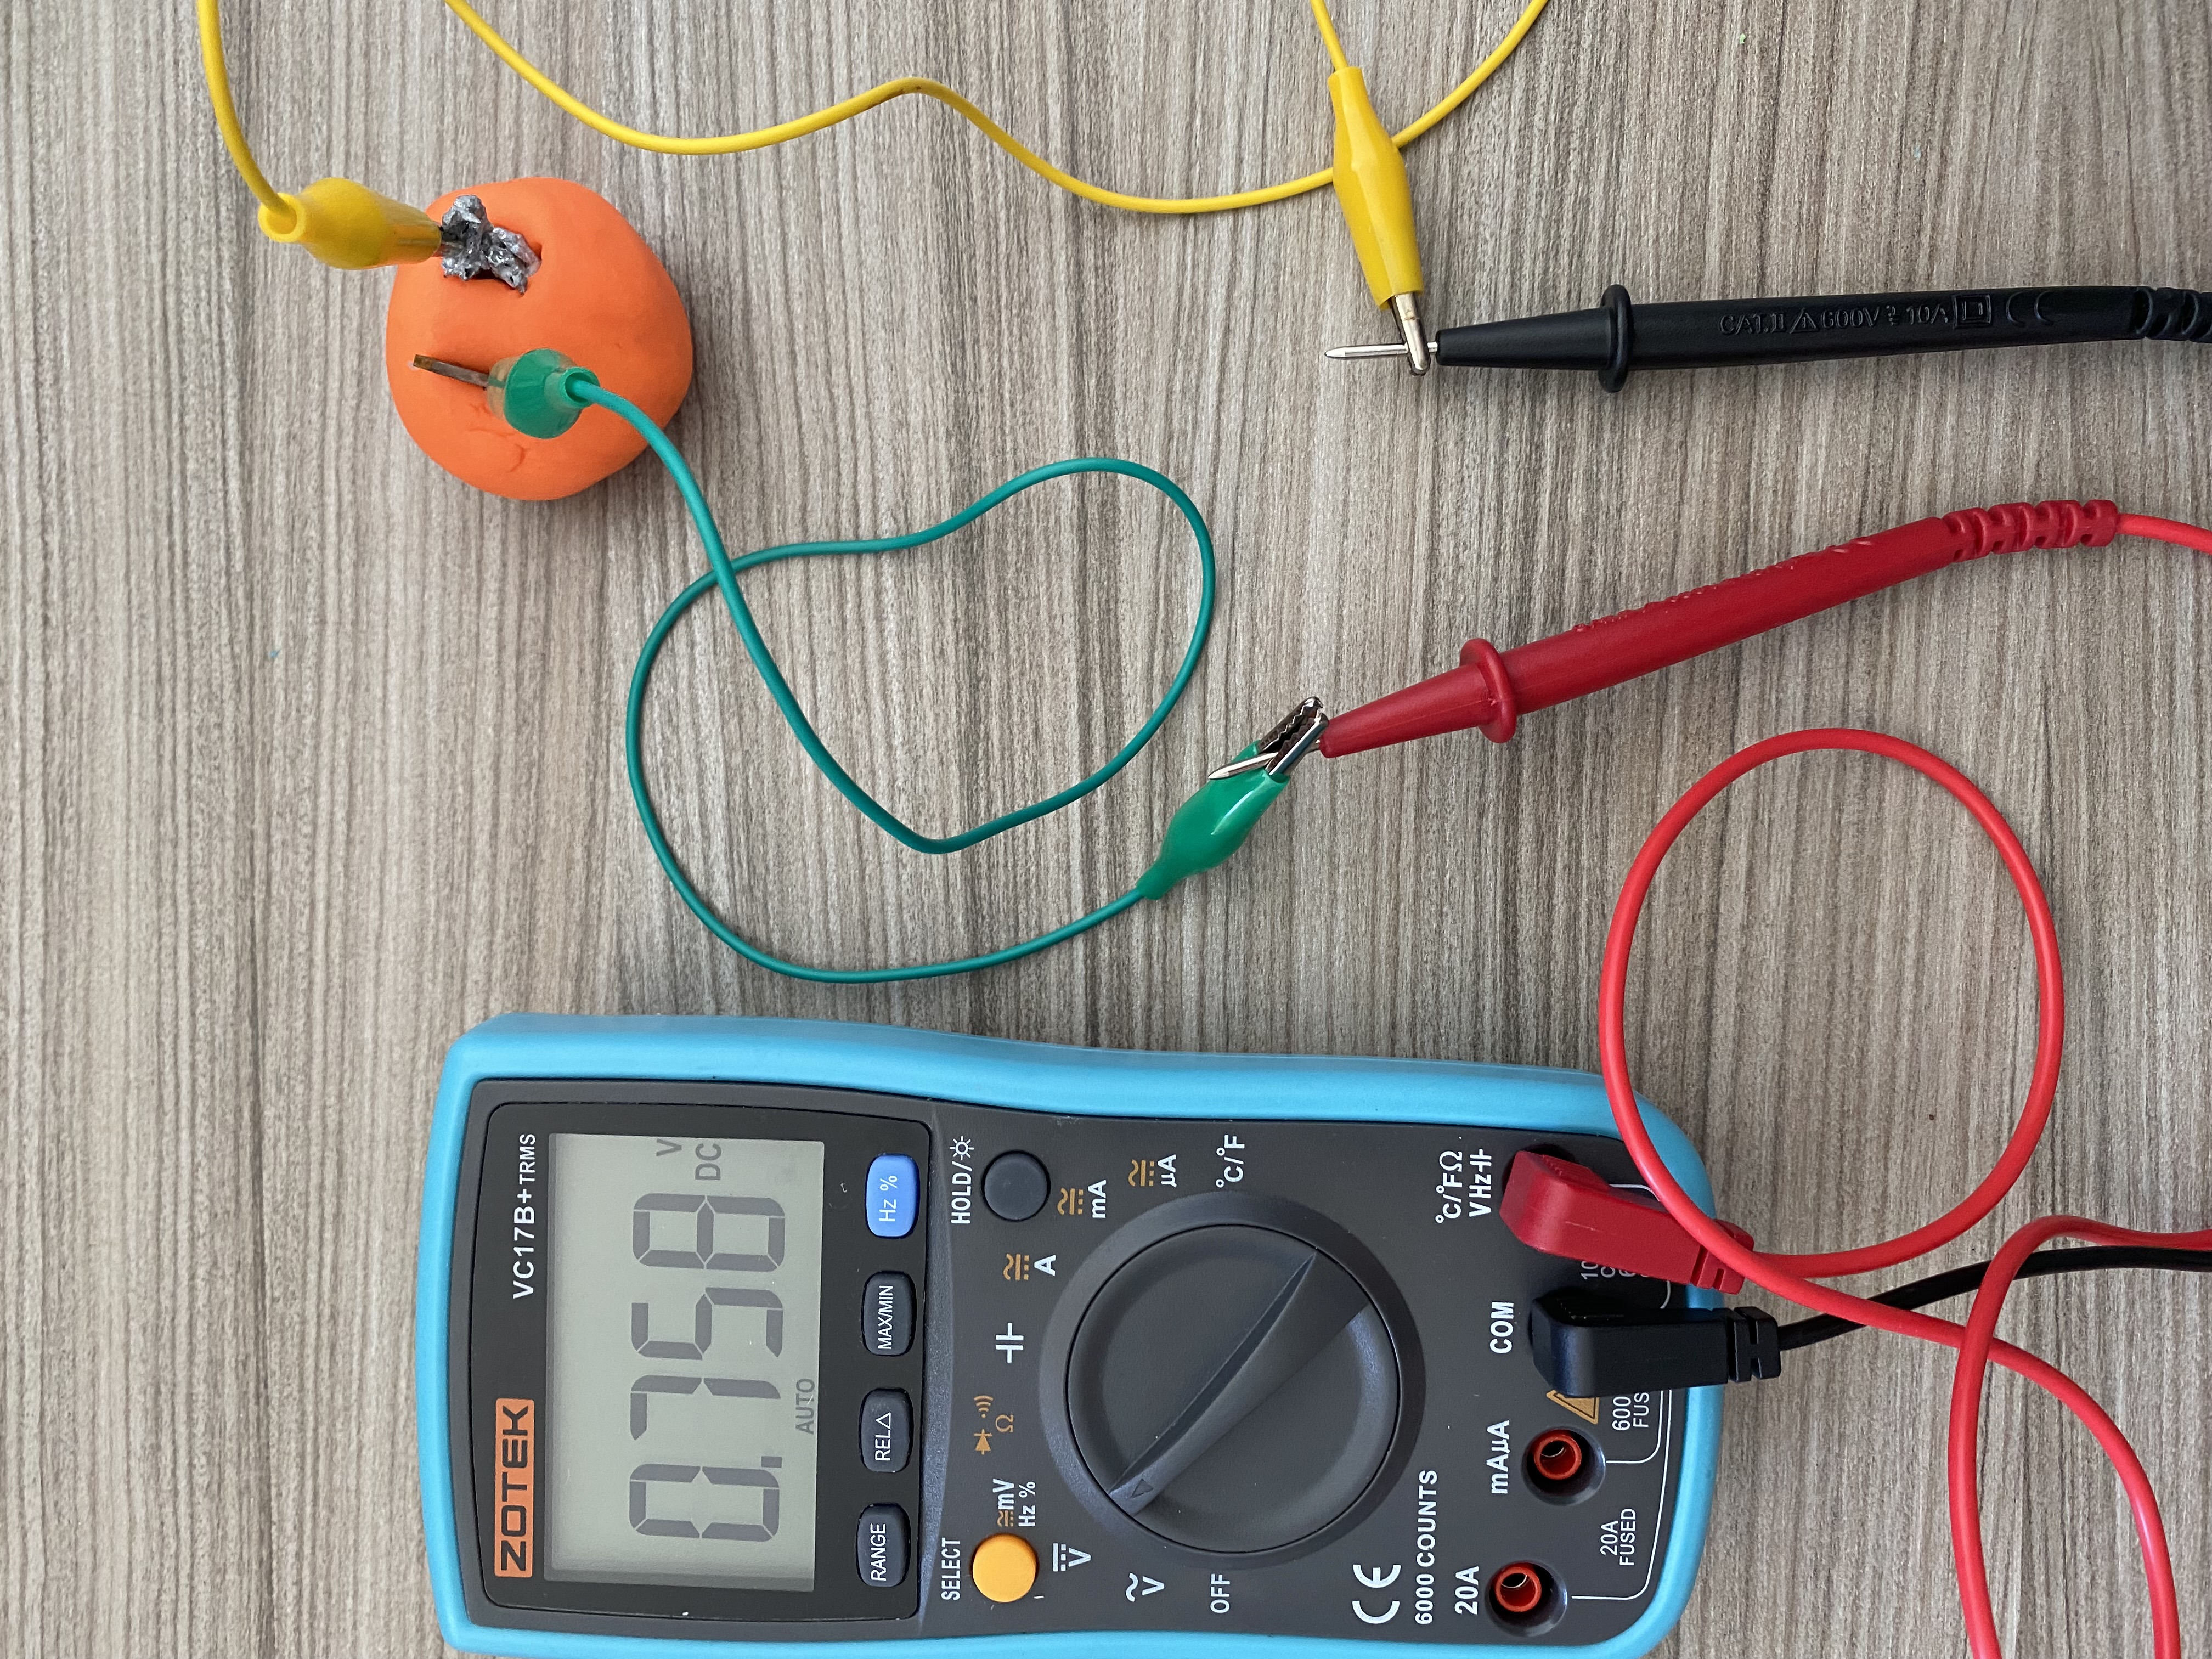 playdough battery connected to a voltmeter by crocodile clips